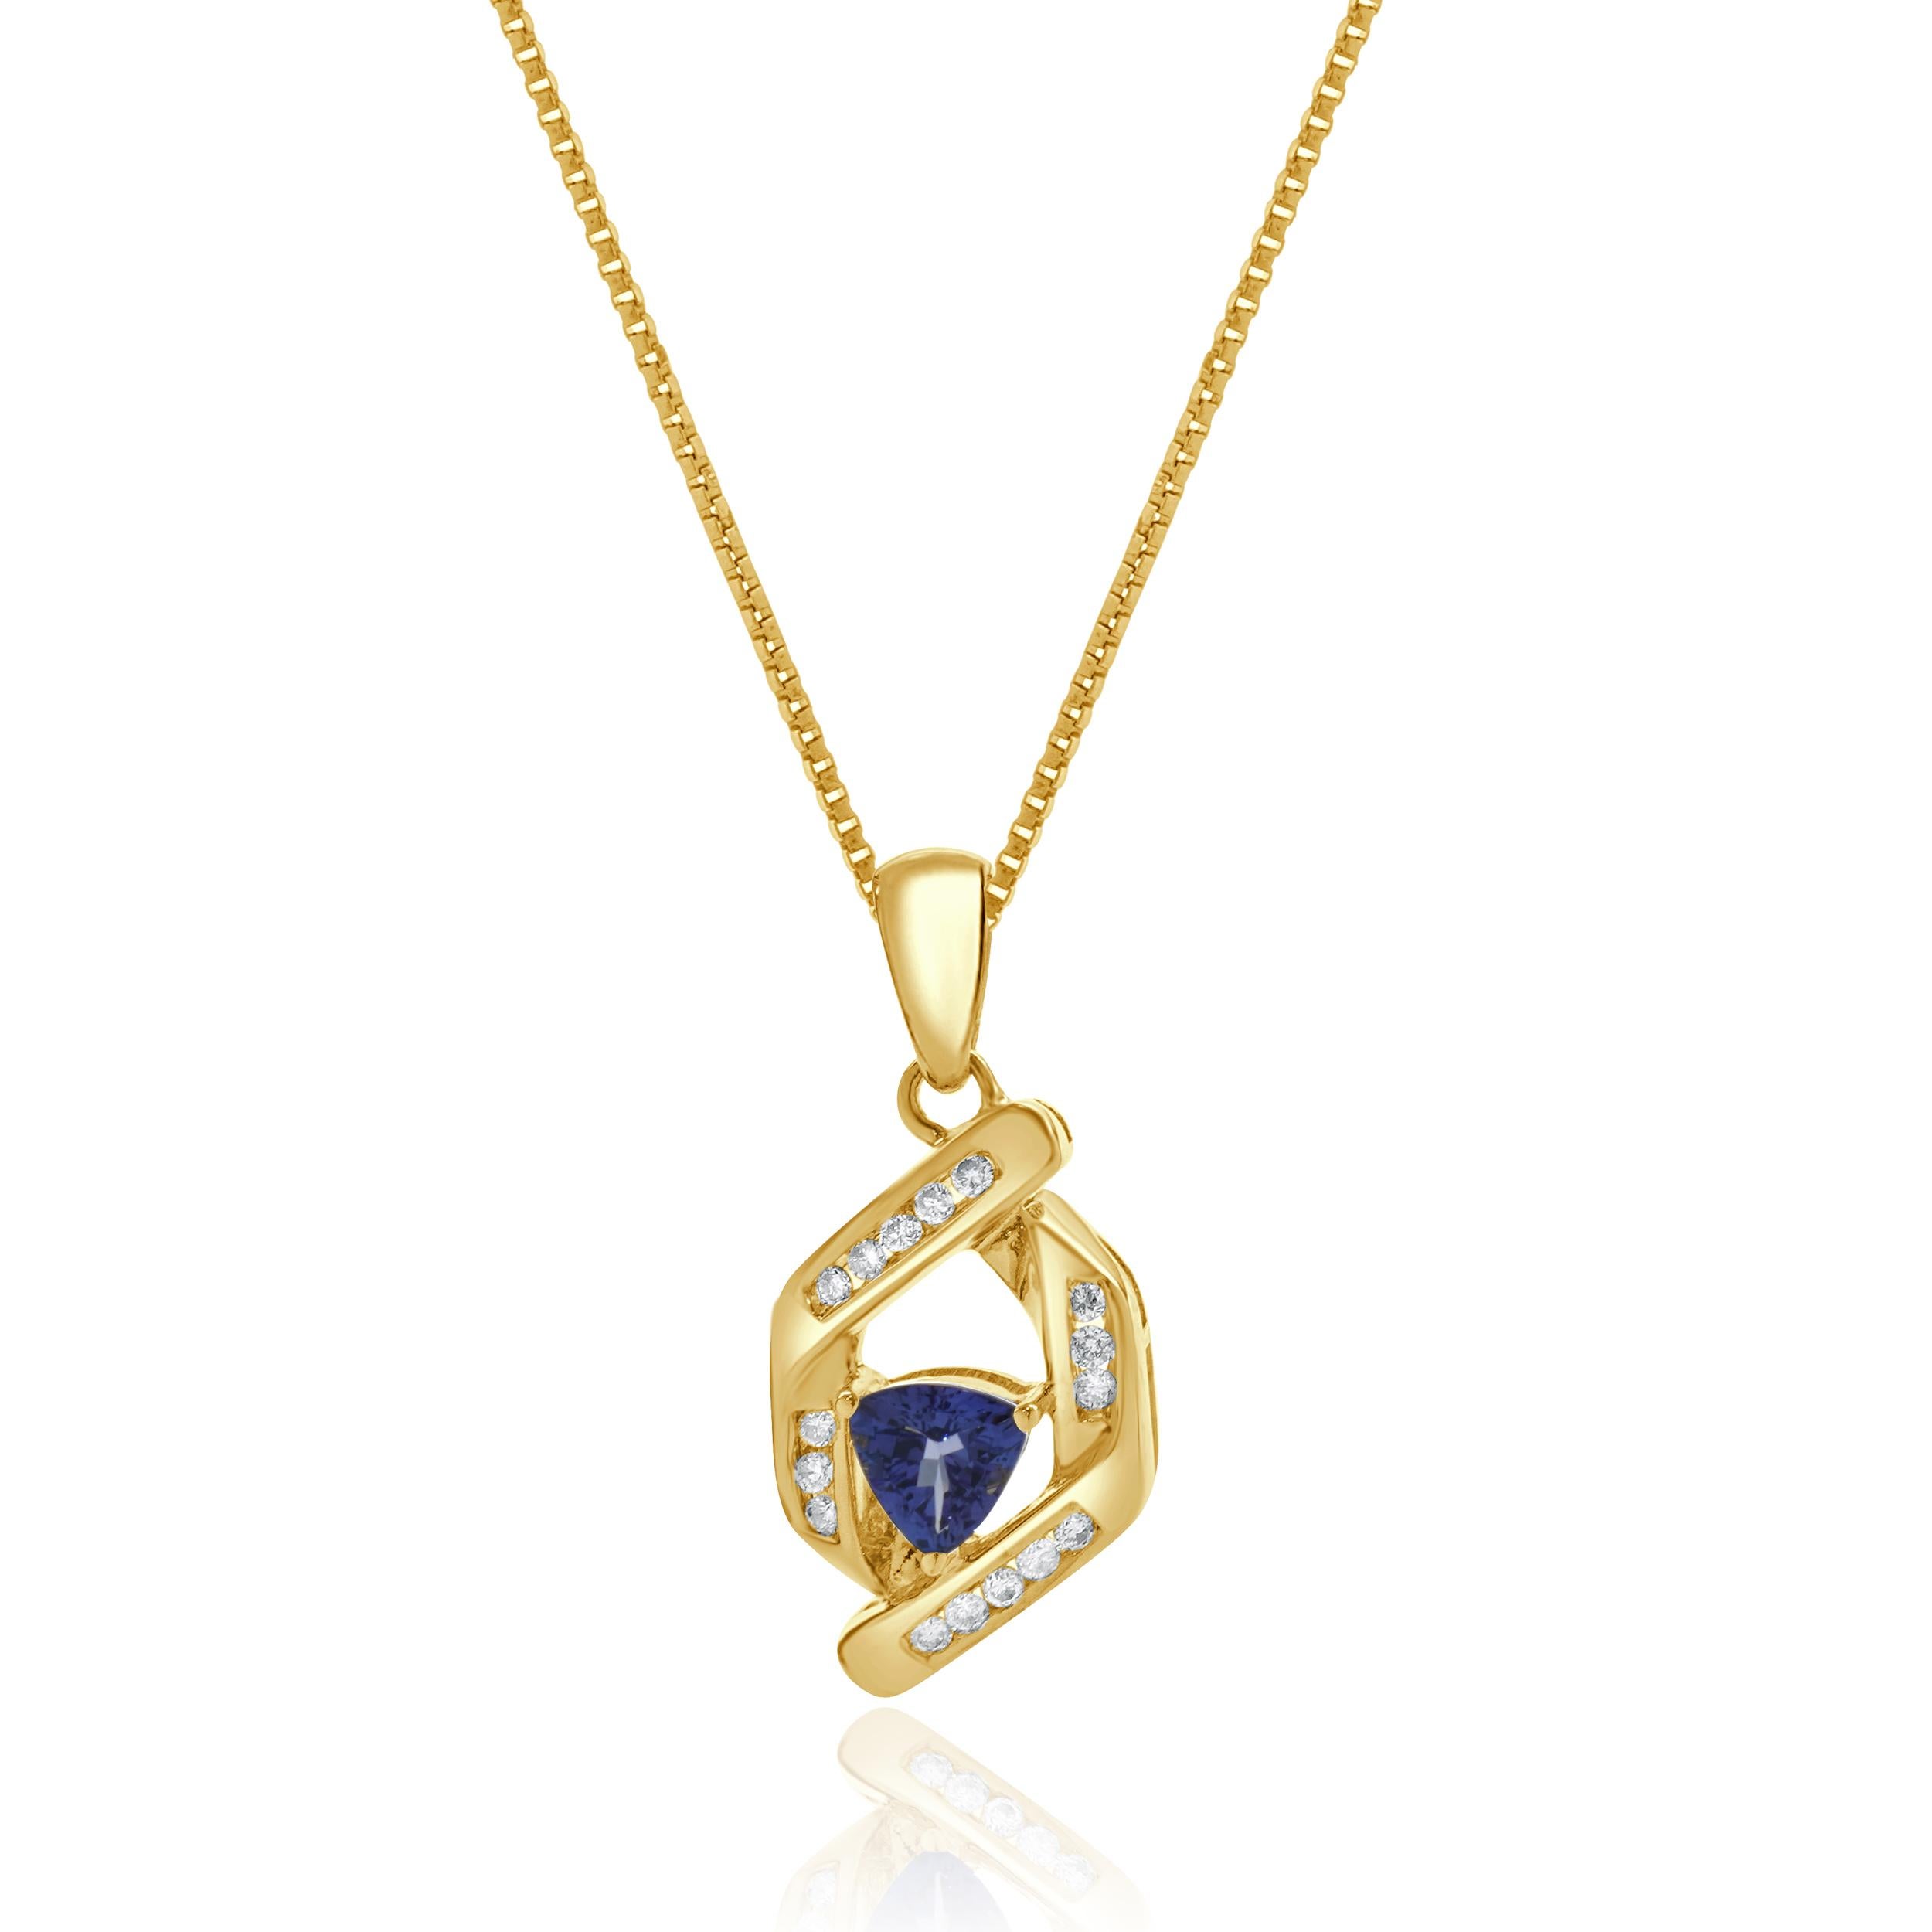 Designer: custom
Material: 18K yellow gold
Diamond: 16 round brilliant cut = 0.16cttw
Color: I / J
Clarity: SI2
Tanzanite: 1 trillion cut = 0.45ct
Dimensions: necklace measures 16-inches in length
Weight: 6.19 grams
